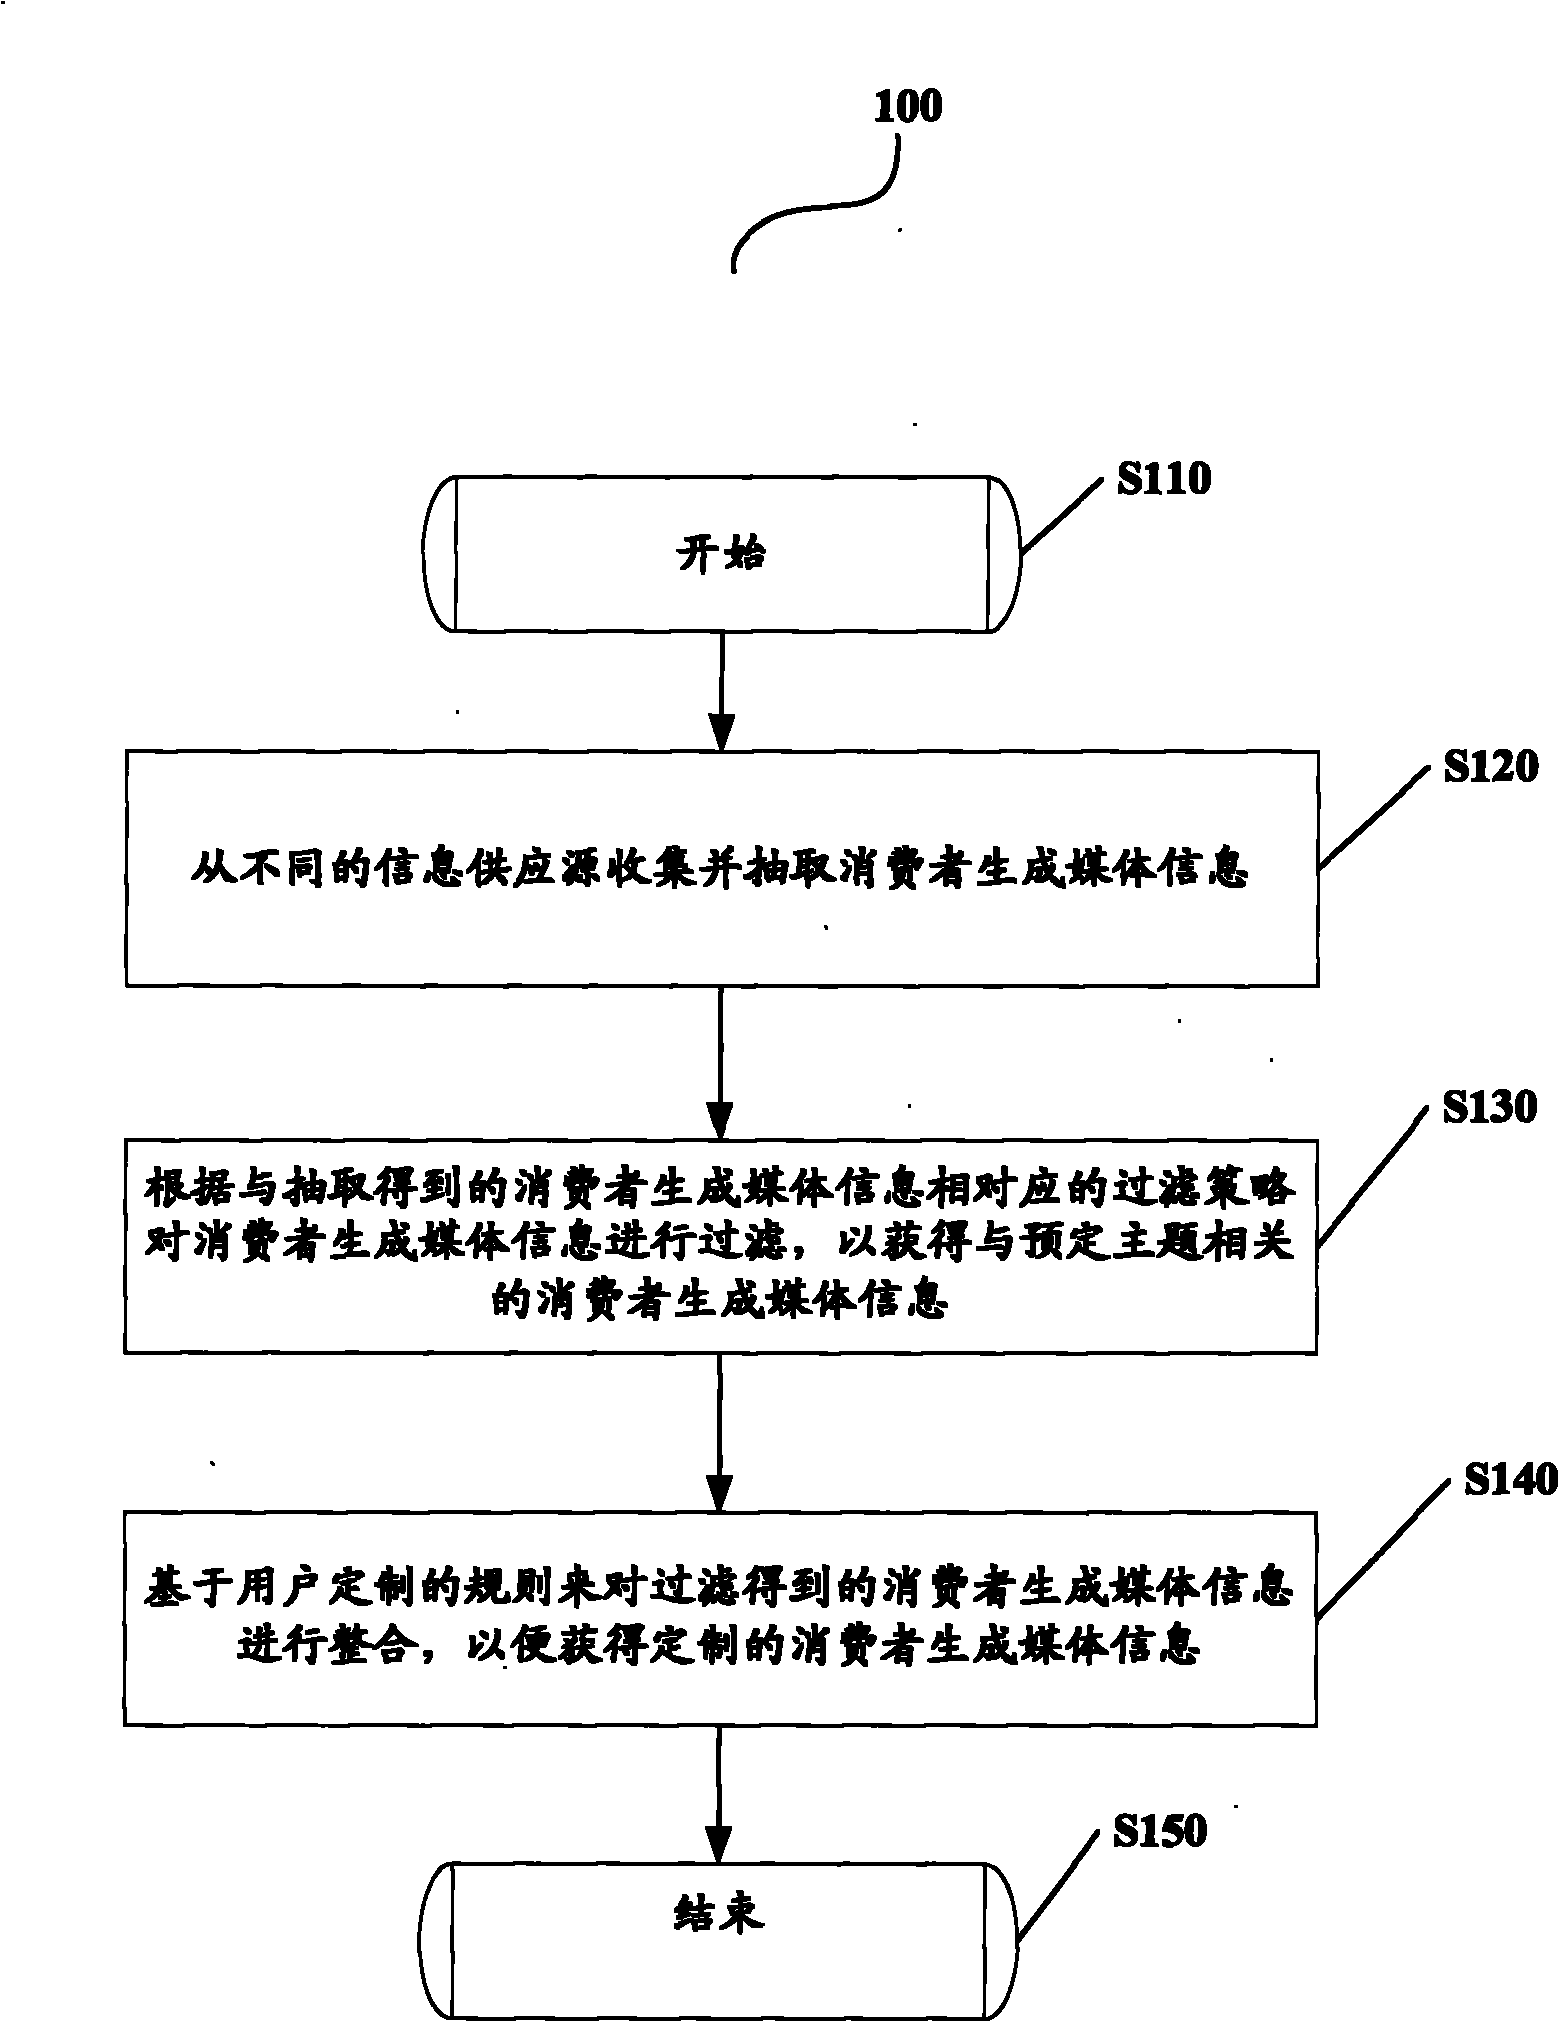 Method, device and program for processing consumer-generated media information